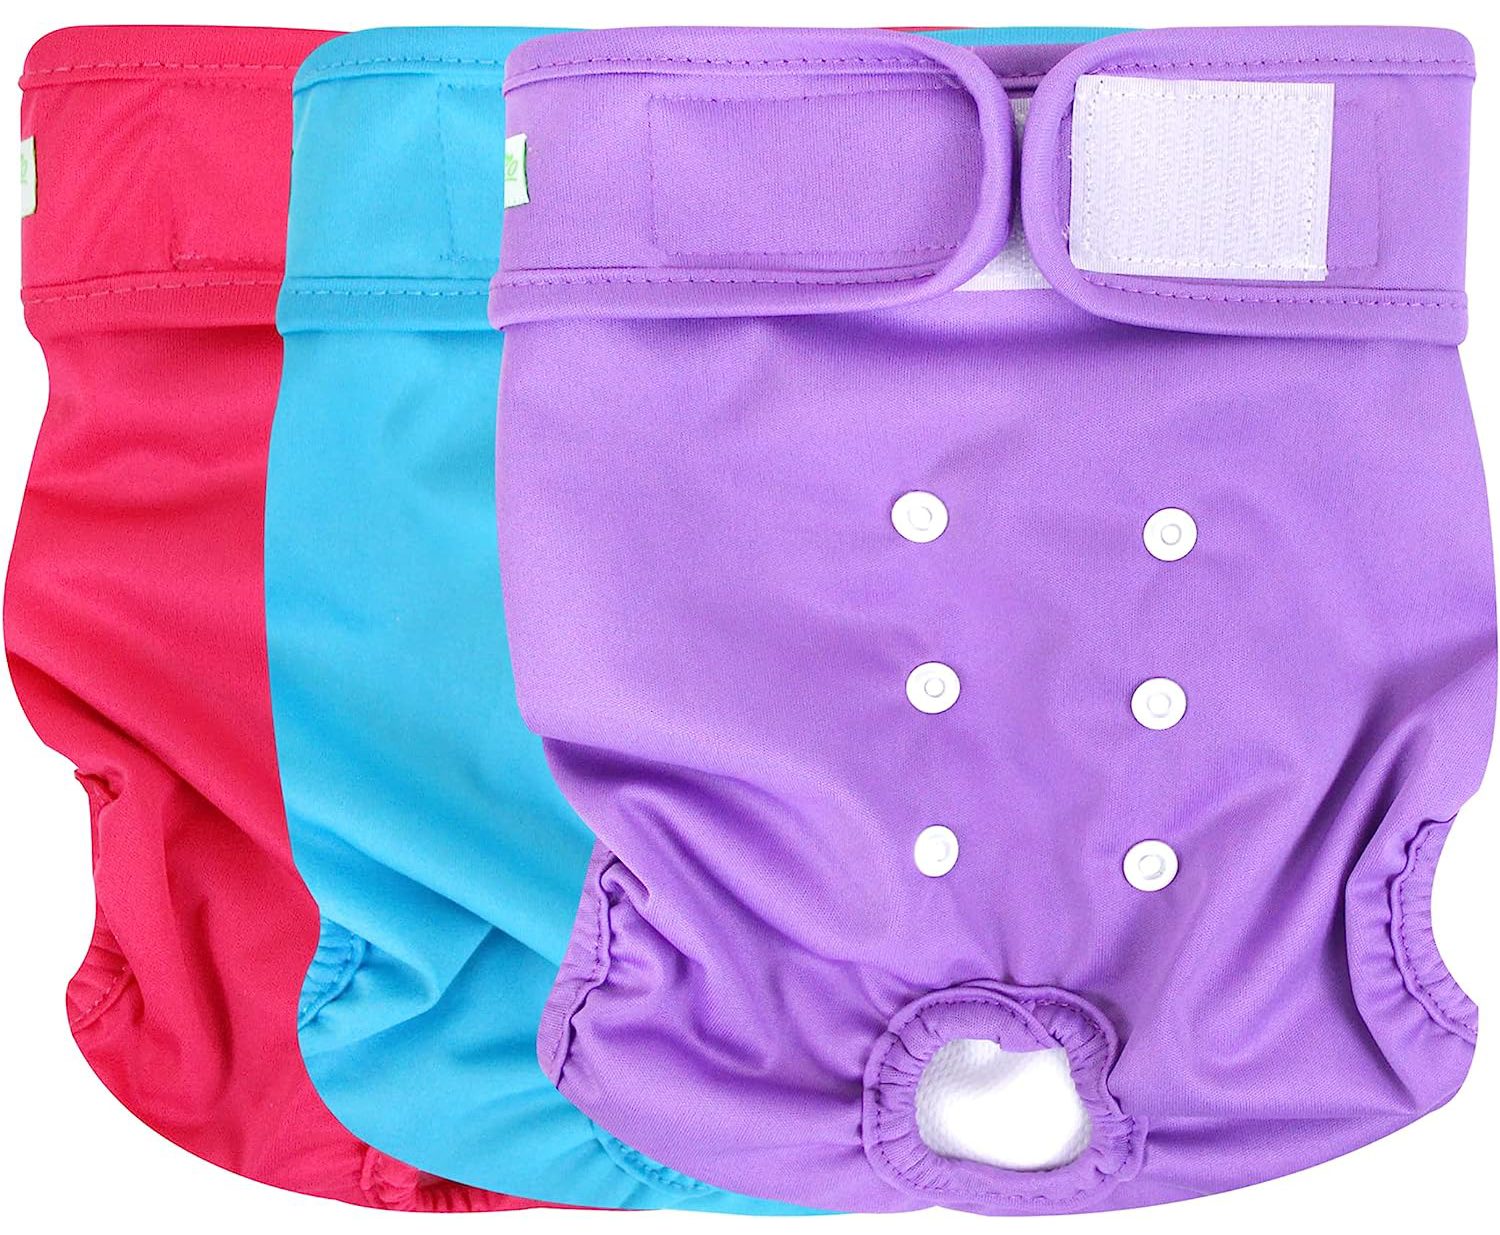 wegreeco Washable Reusable Premium Dog Diapers, Small, Bright Color, for Female Dog 